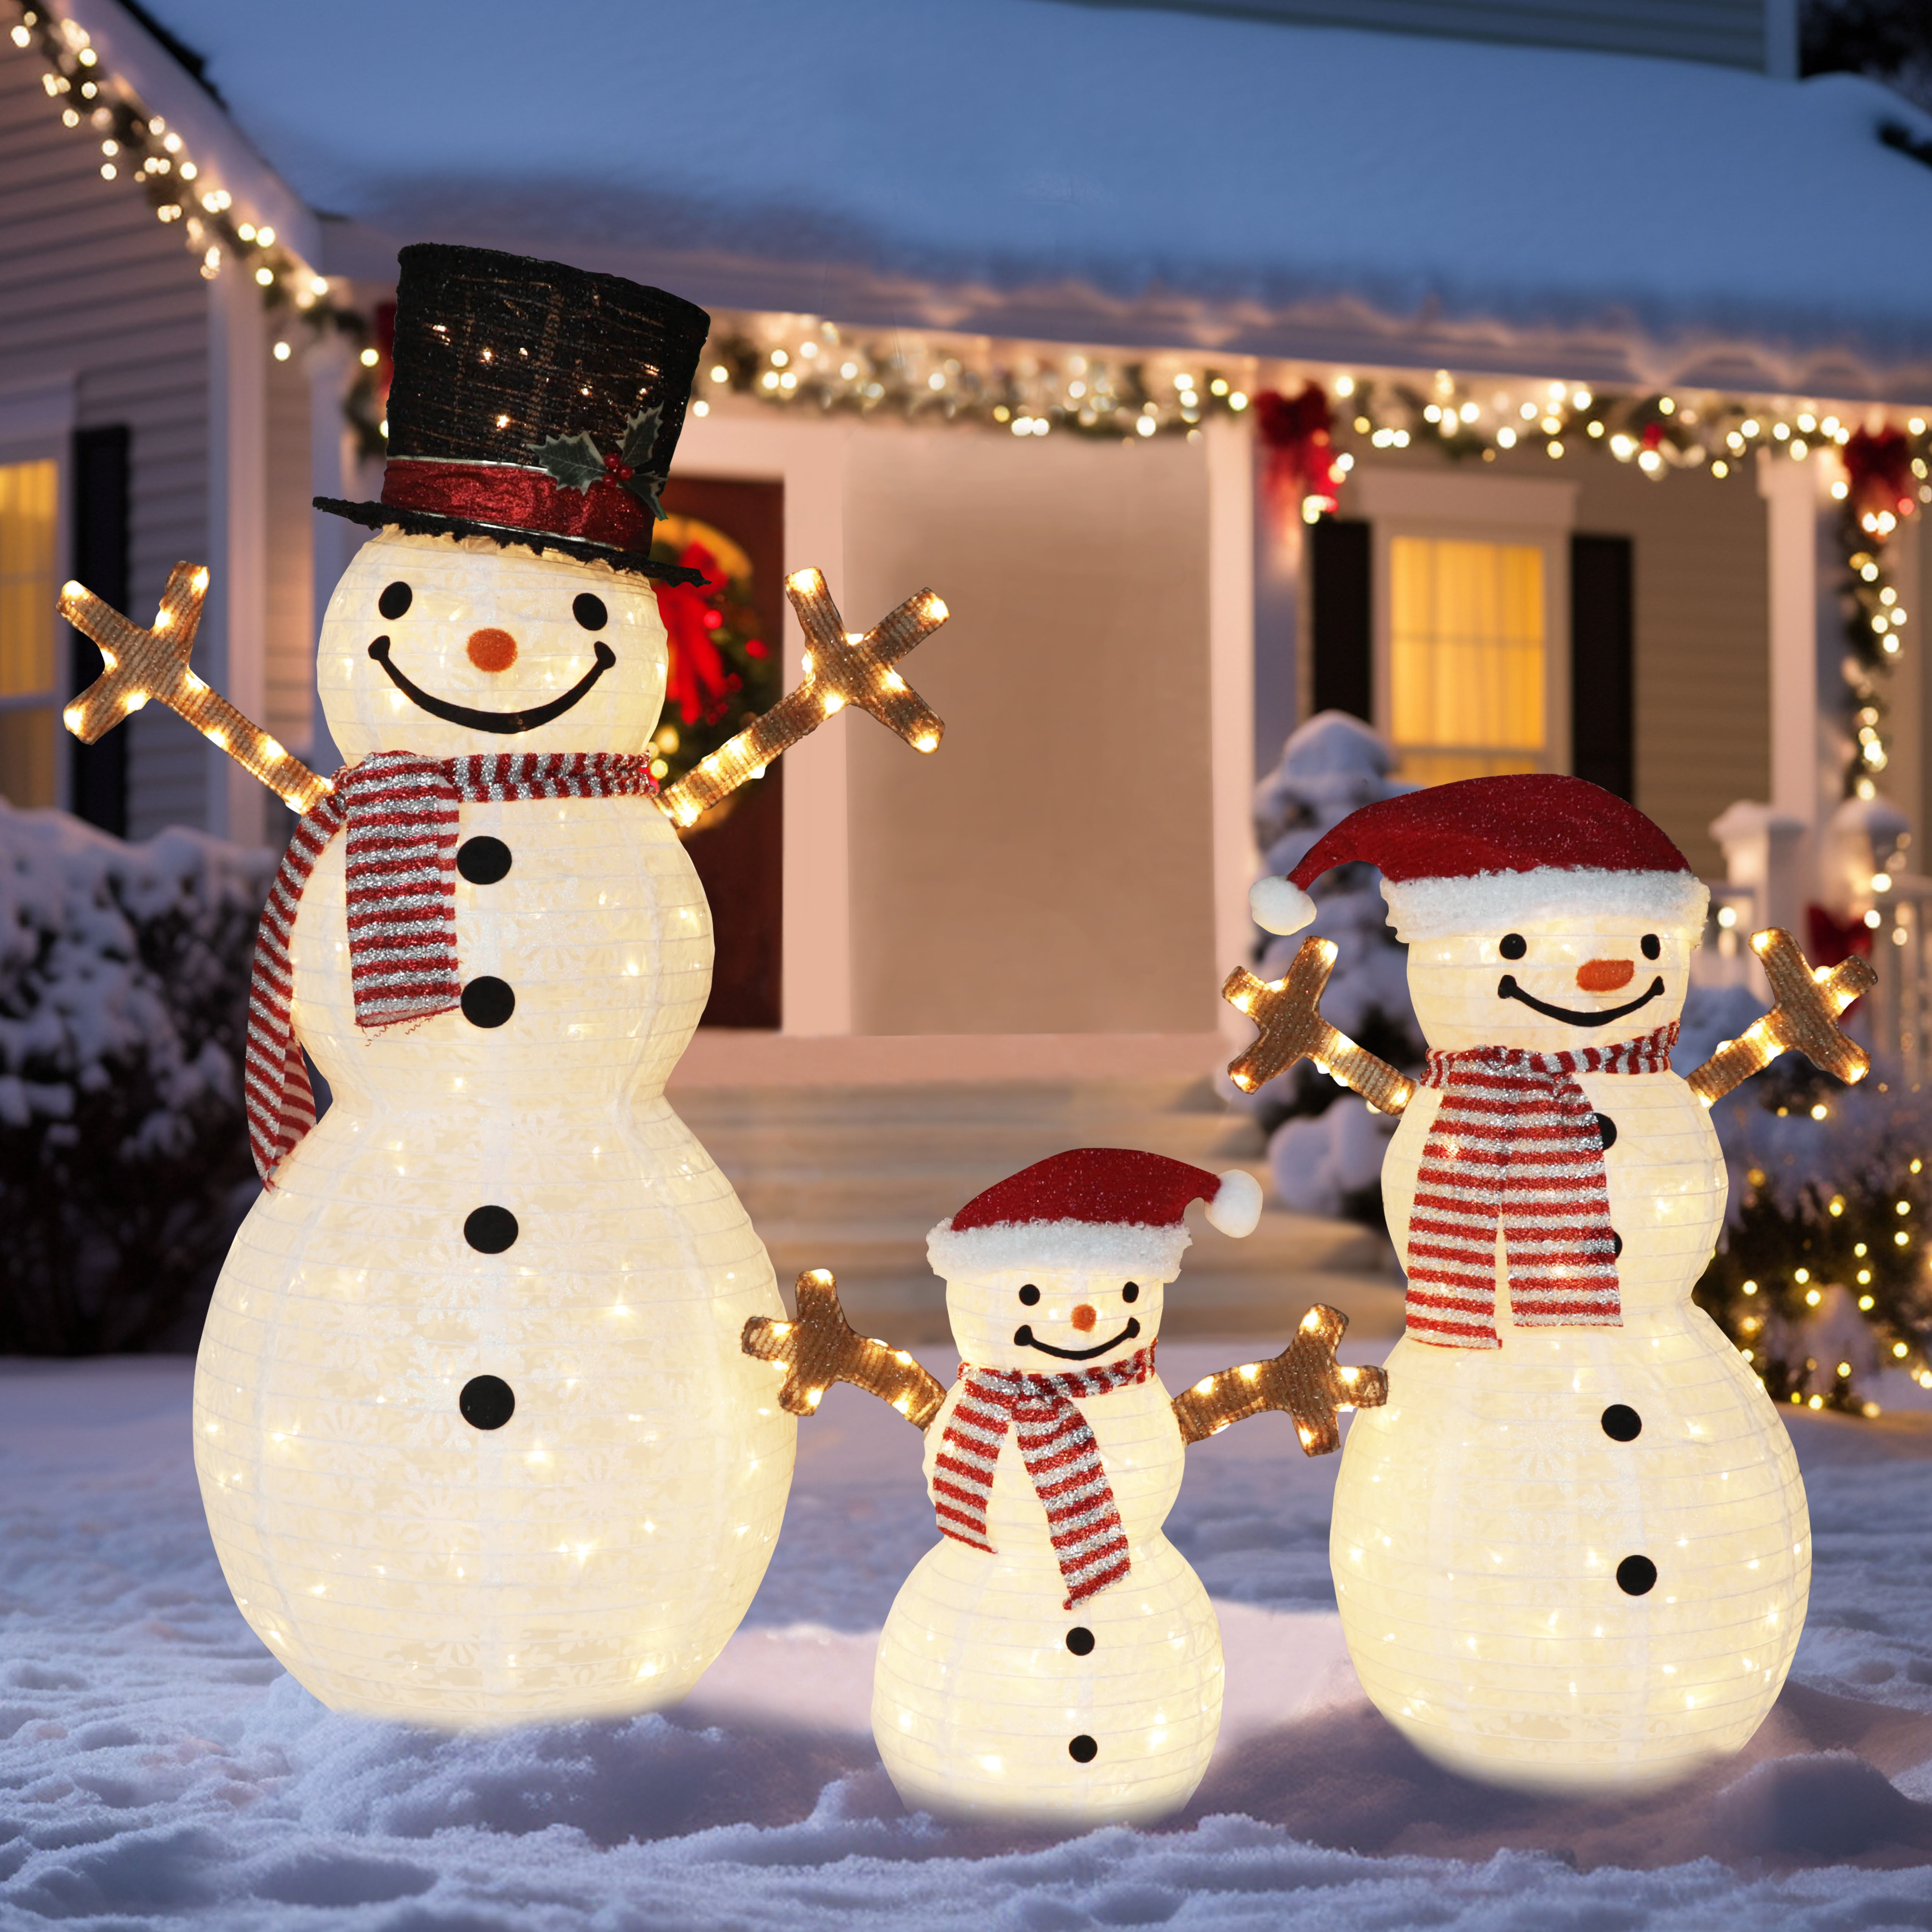 VEIKOUS 5ft Lighted Christmas Snowman Decorations w/ Top Hat, Red 